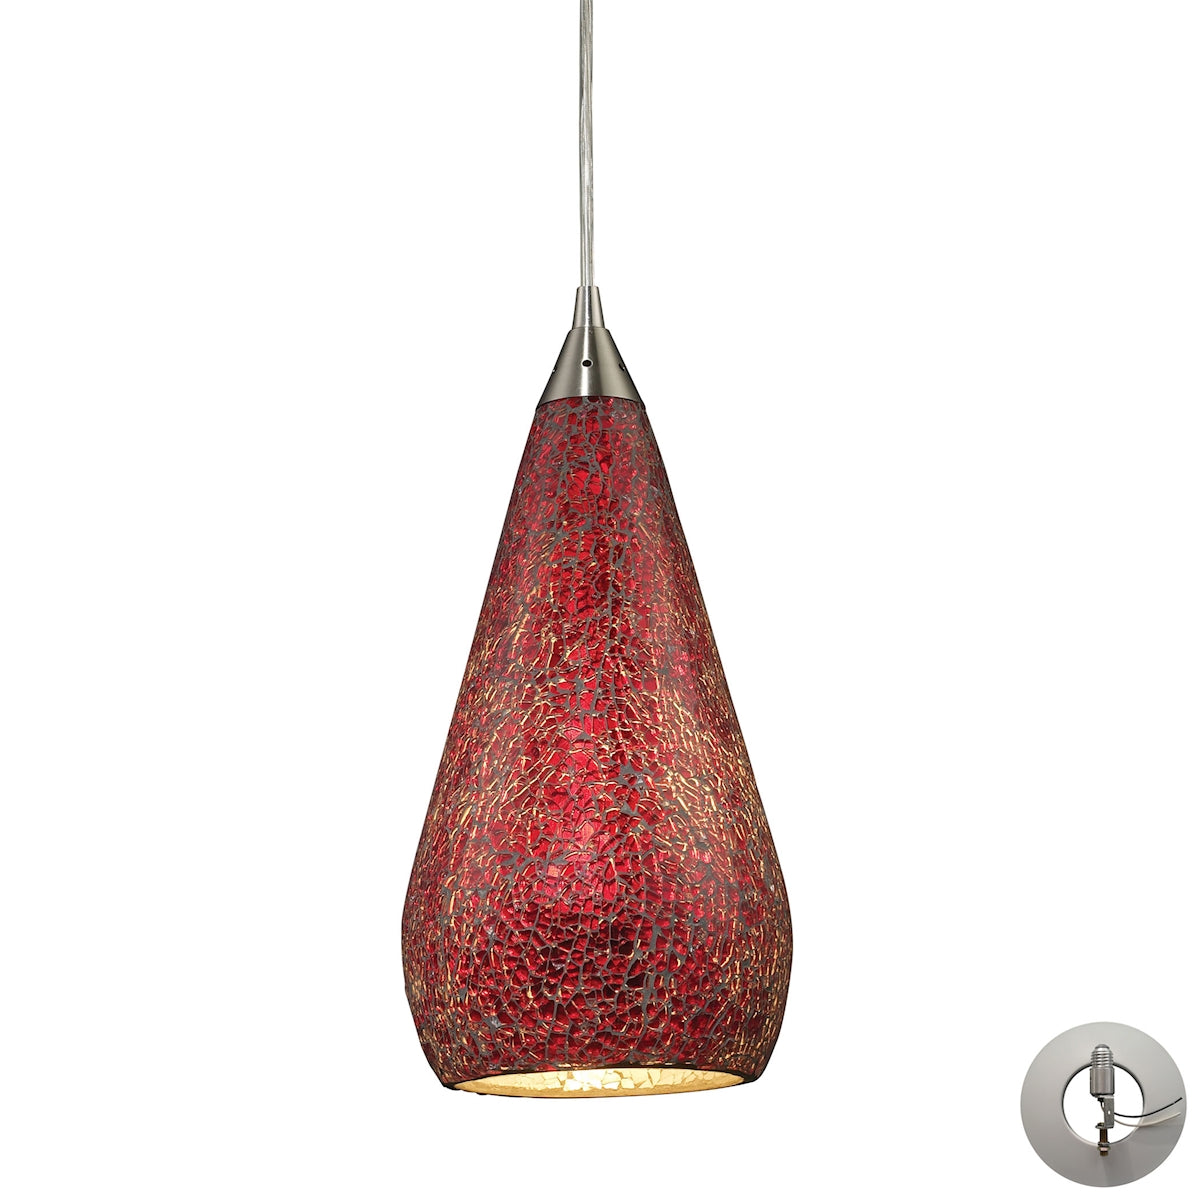 ELK Lighting 546-1RBY-CRC-LA Curvalo 1-Light Mini Pendant in Satin Nickel with Ruby Crackle Glass - Includes Adapter Kit